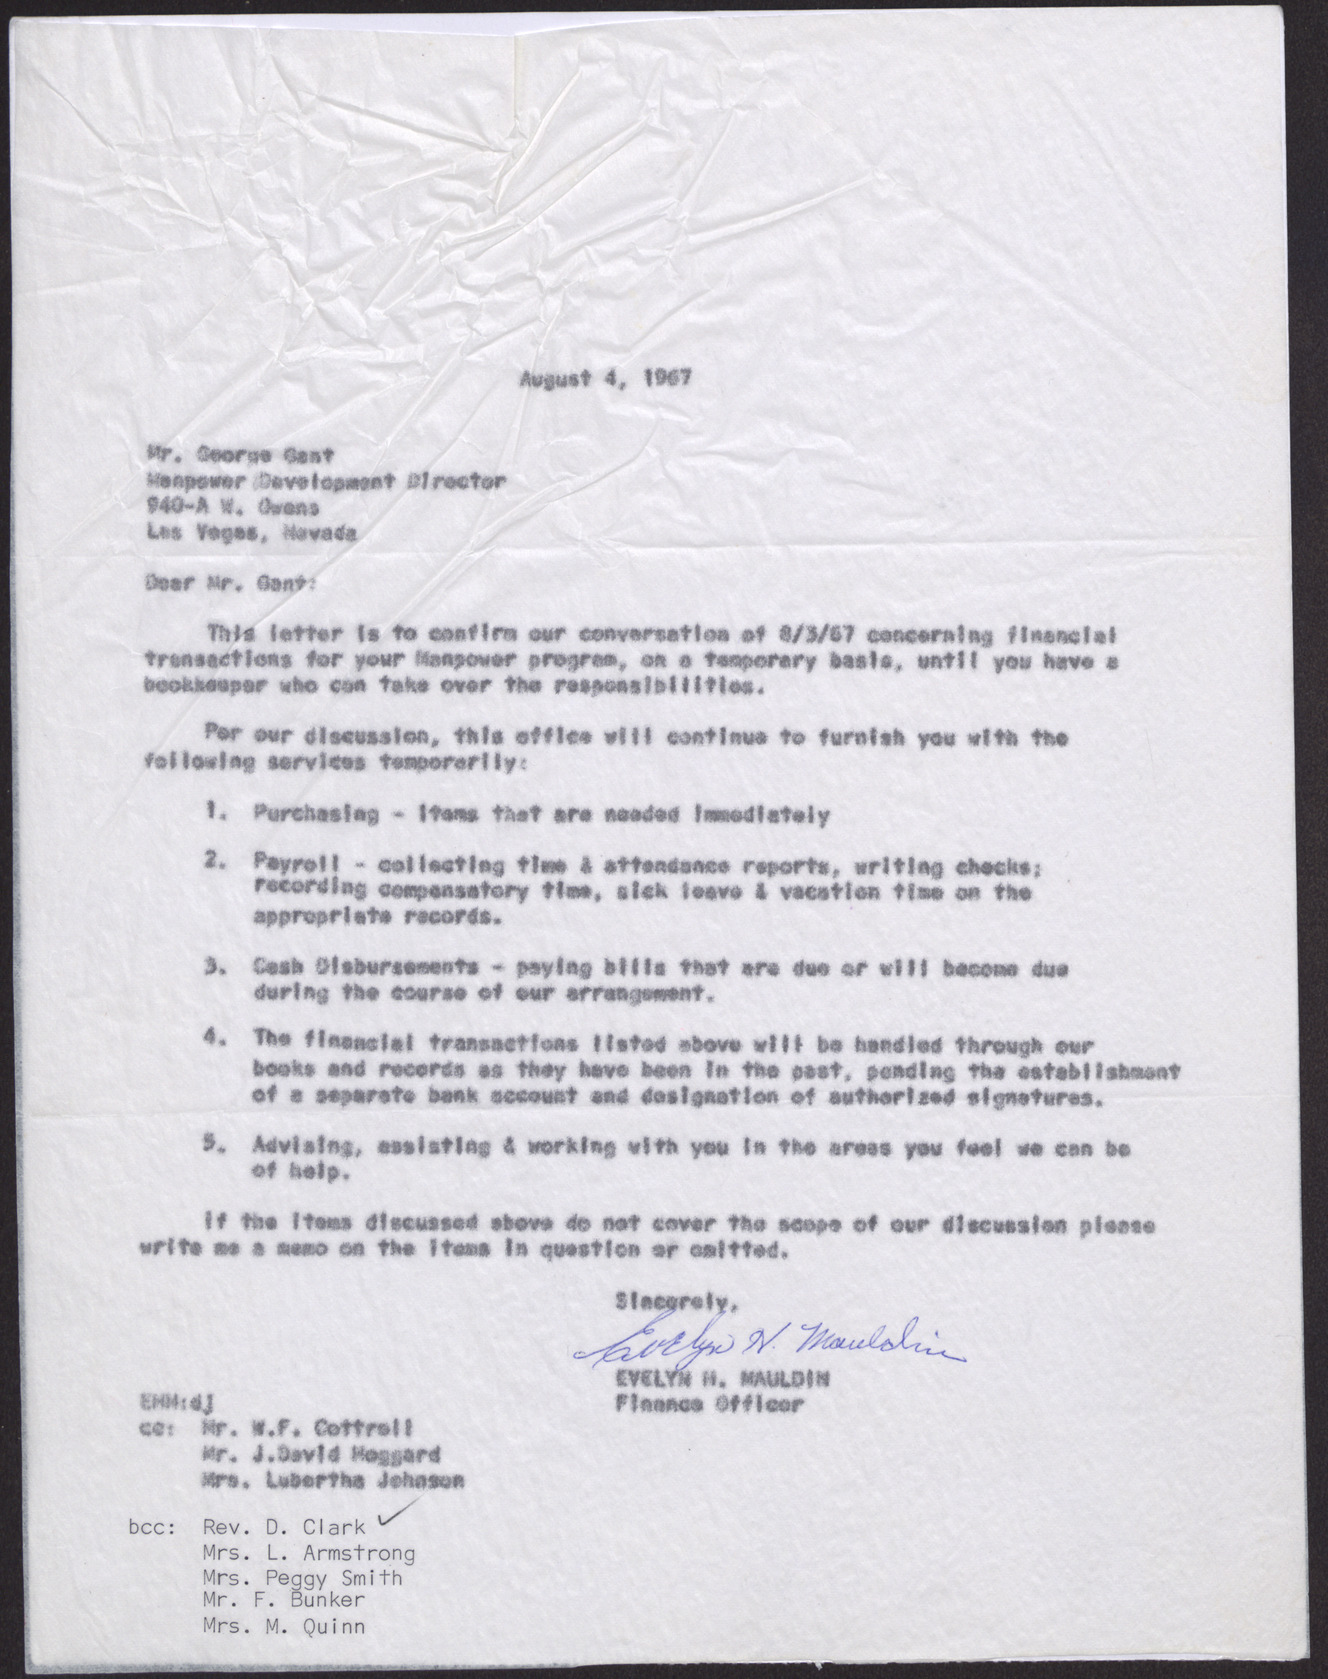 Letter to Mr. George Gant from Evelyn H. Maudlin, August 4, 1967